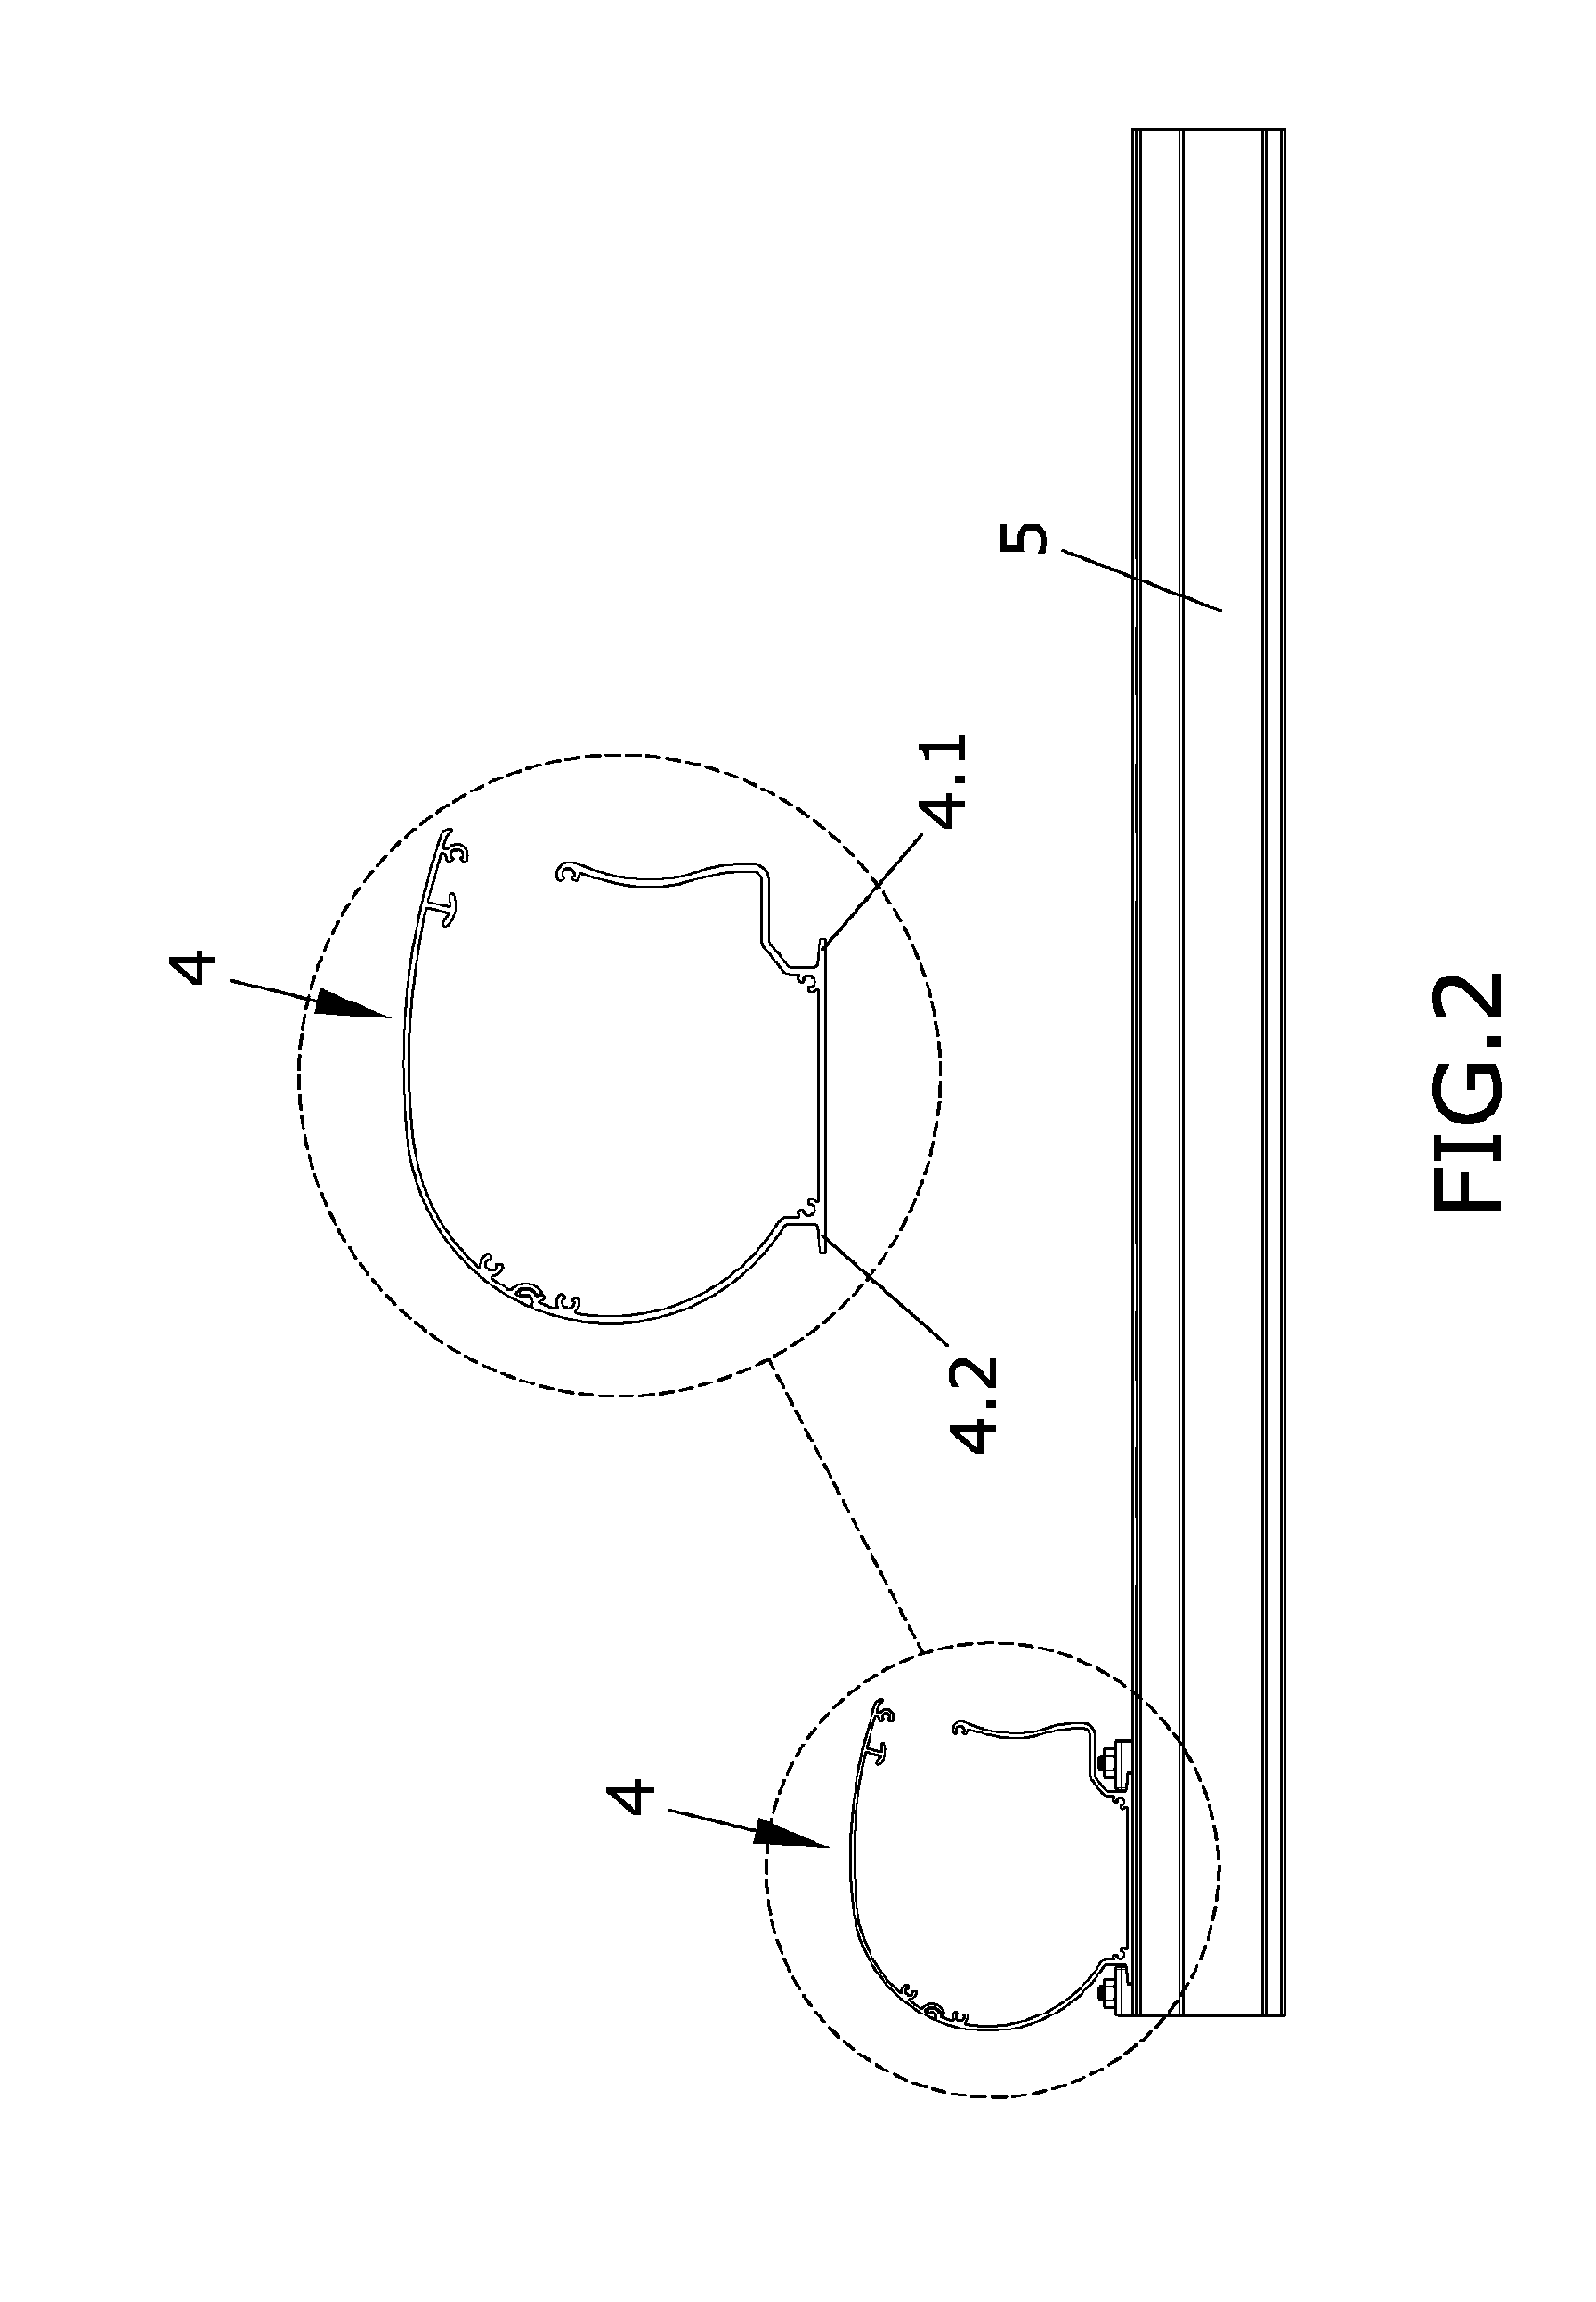 Shading device and method for installing the casing of said shading device